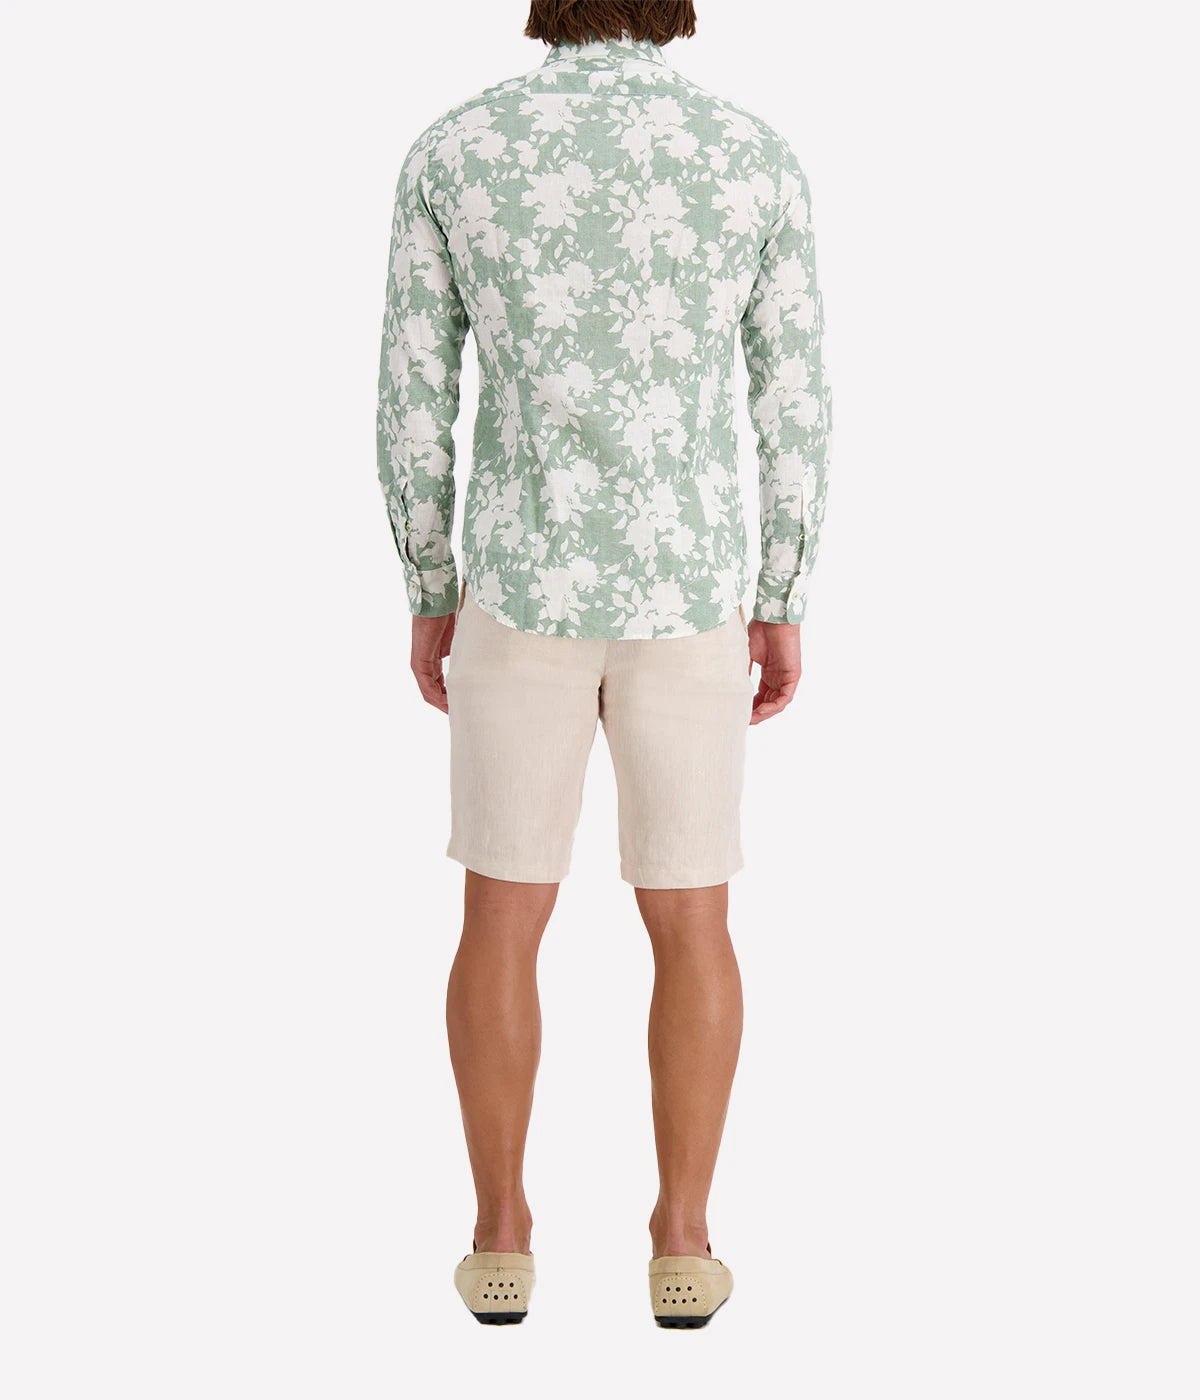 Slim Fit Linen Shirt in Green Floral